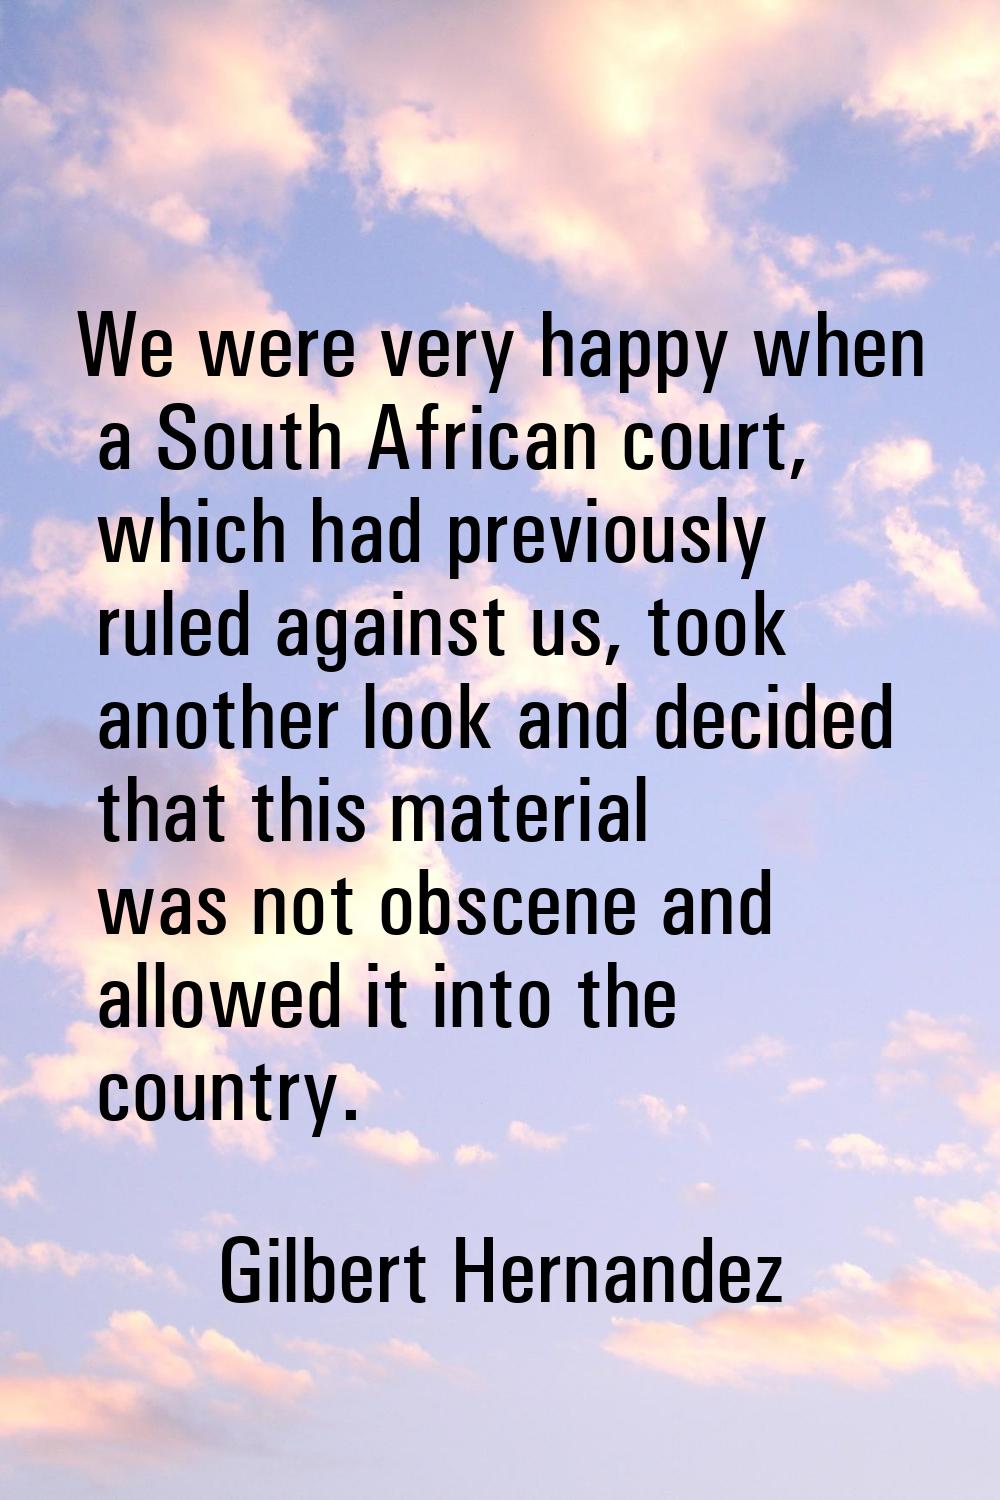 We were very happy when a South African court, which had previously ruled against us, took another 